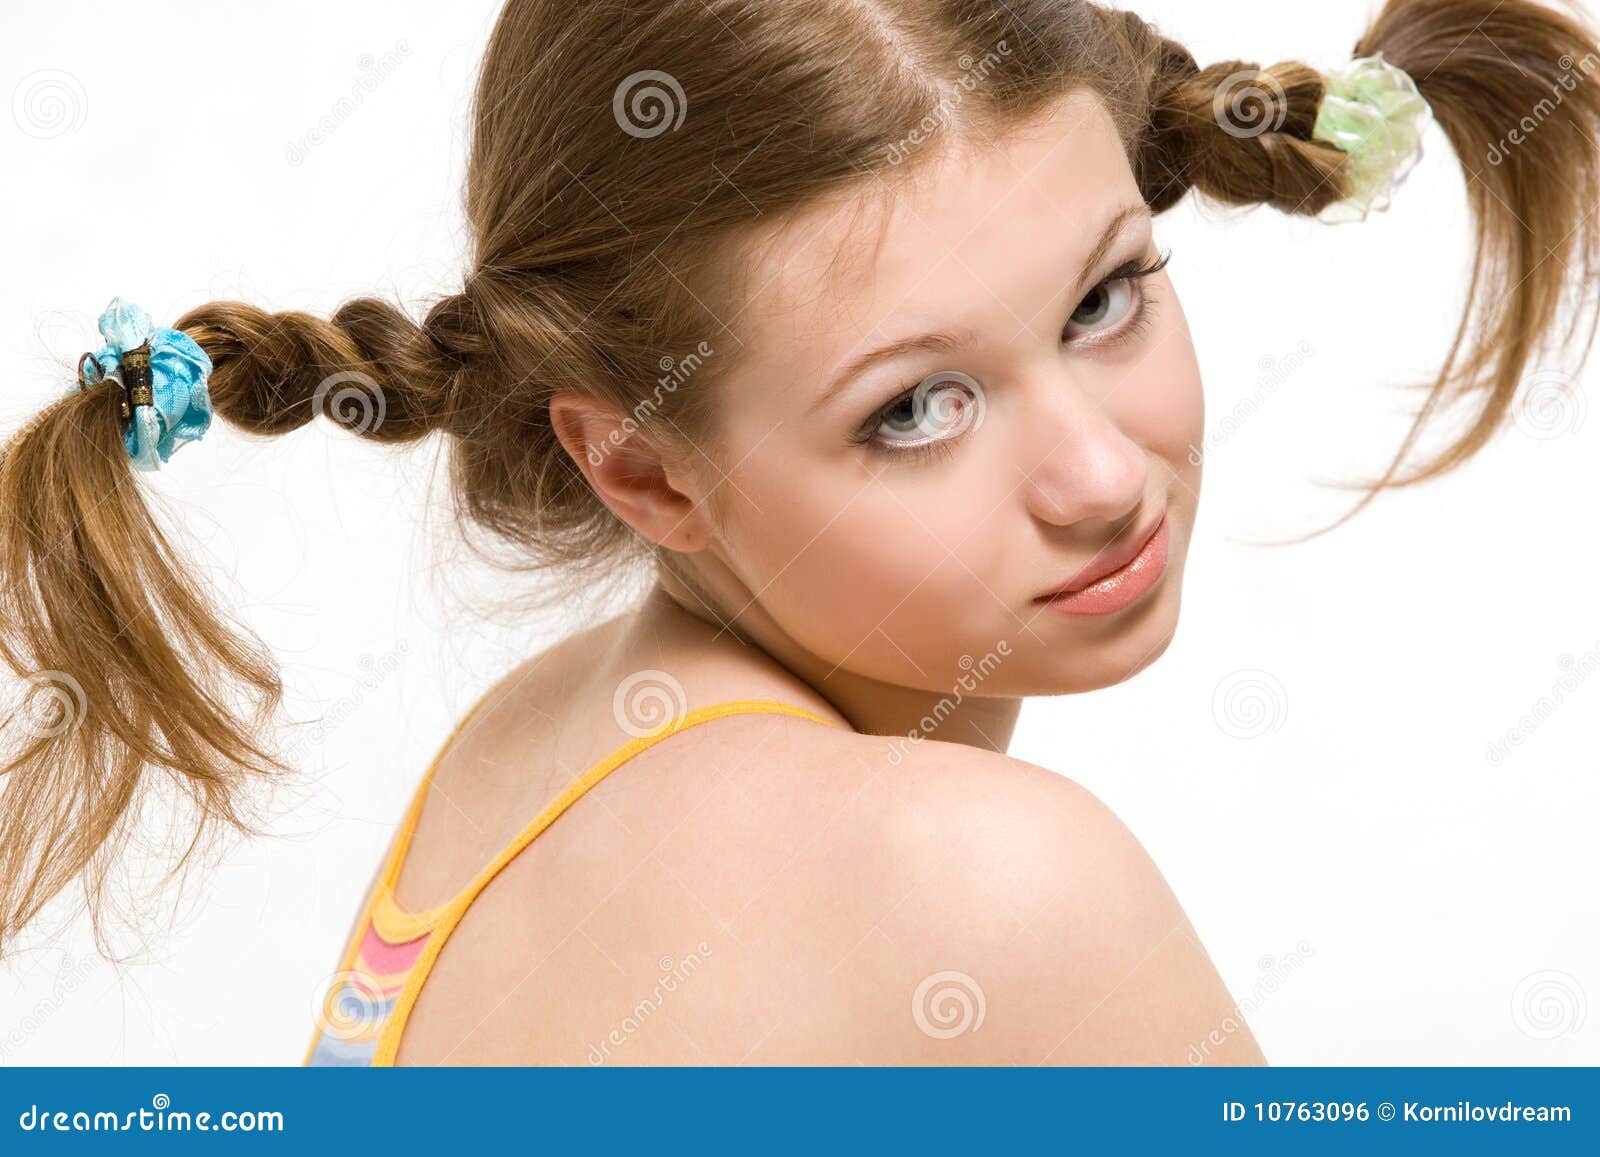 Pigtails Stock Photo Image Of Ponytail Female Affection